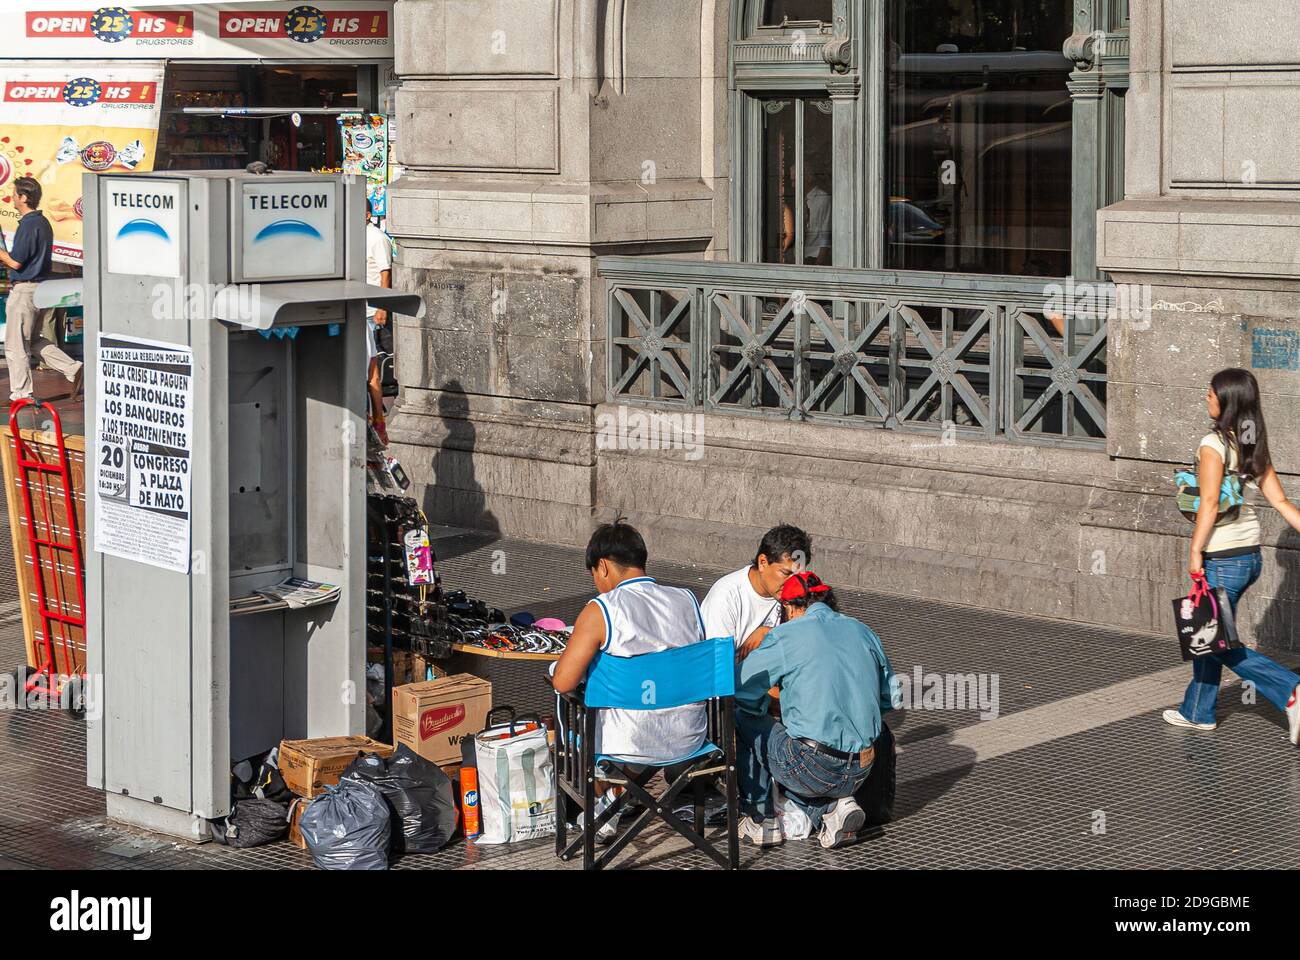 Buenos Aires, Argentiana- December 19, 2008: Ambulant sunglasses vendor sits near defunct telephone booth of Telecom at Retiro Station on Ave dr. Jose Stock Photo